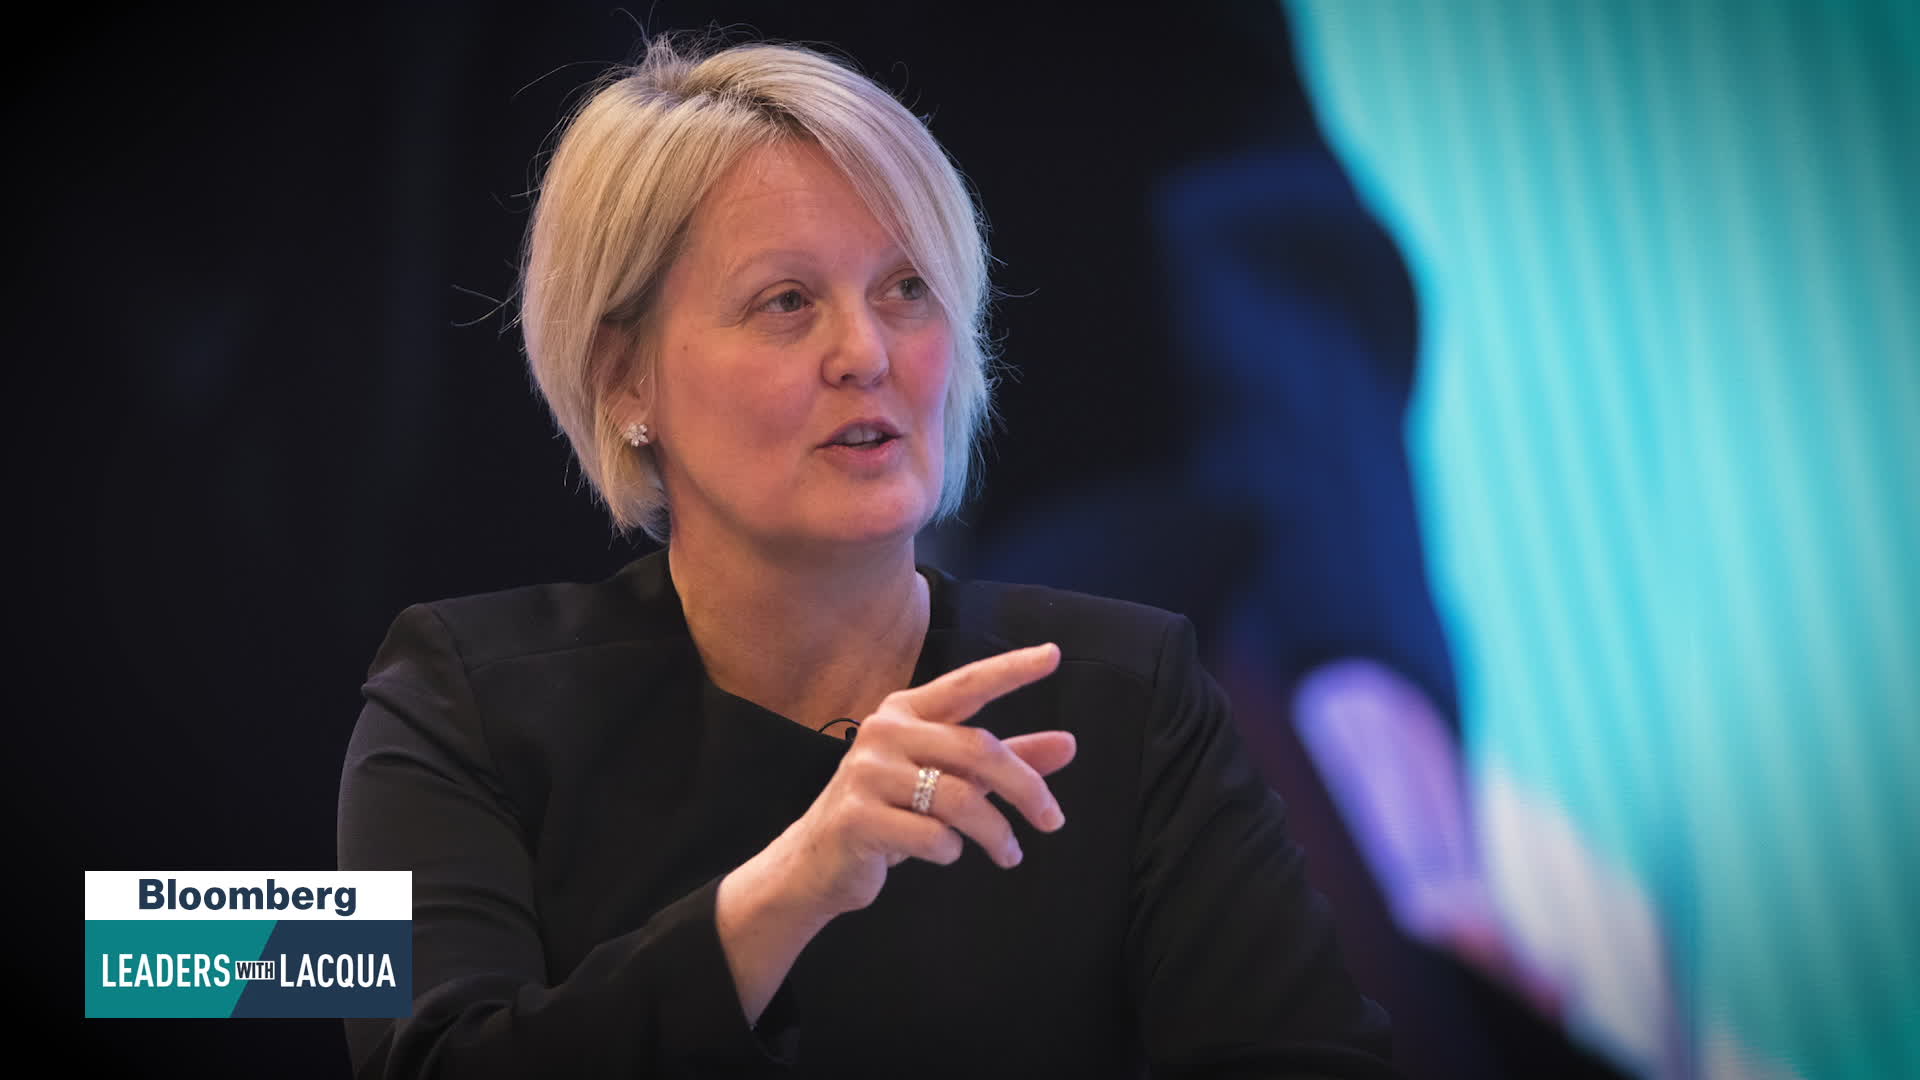 Watch Leaders with Lacqua - Natwest CEO Alison Rose - Bloomberg